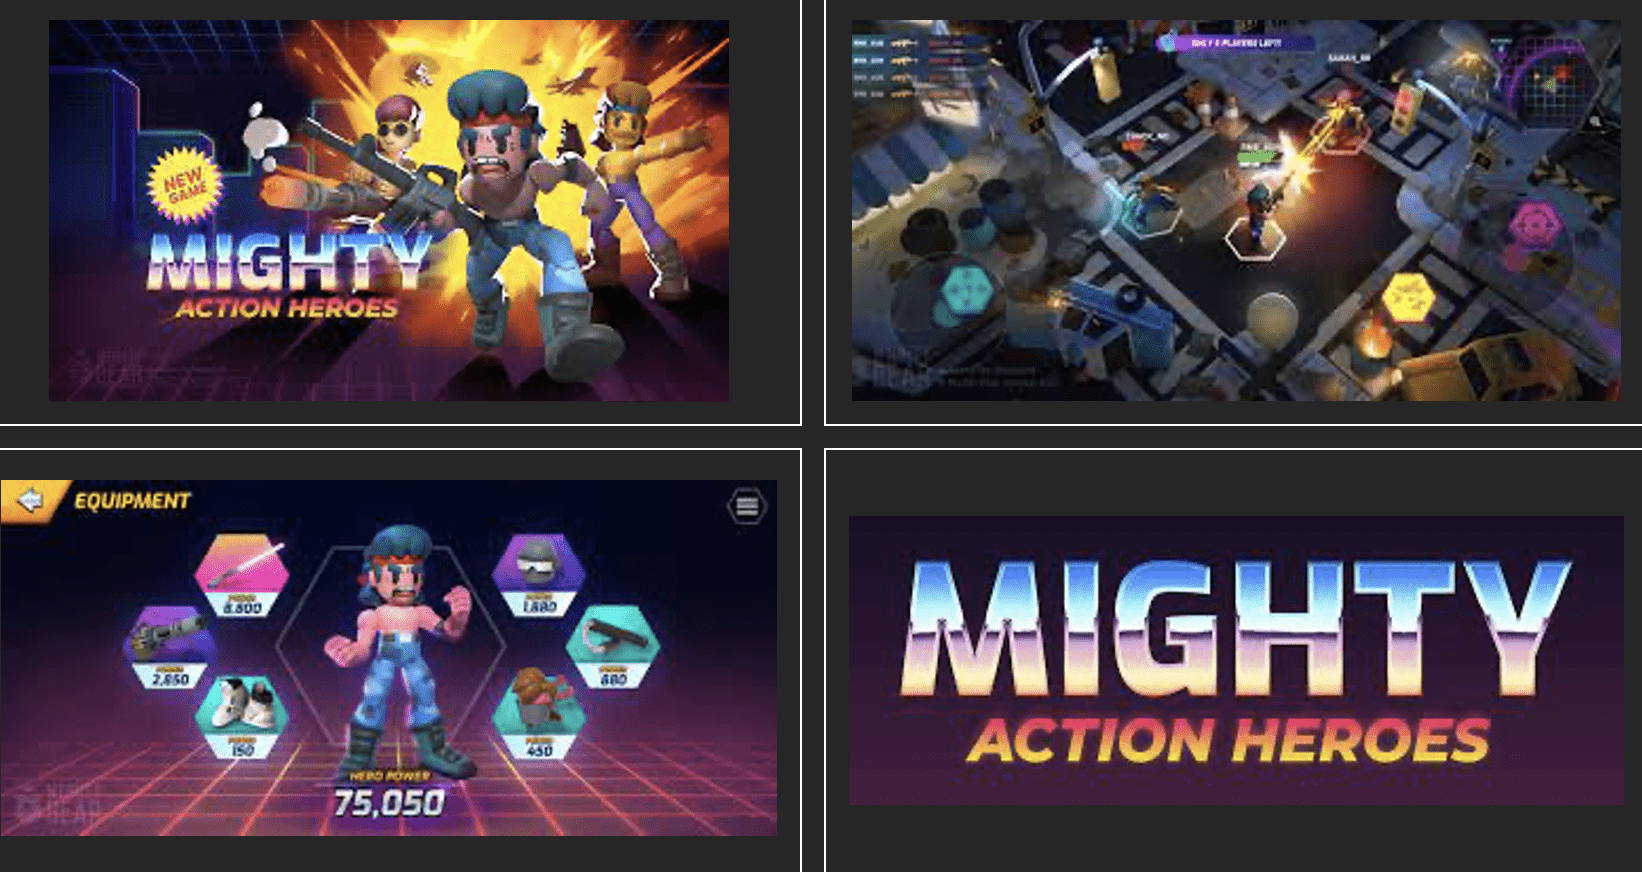 Mighty action heroes p2e